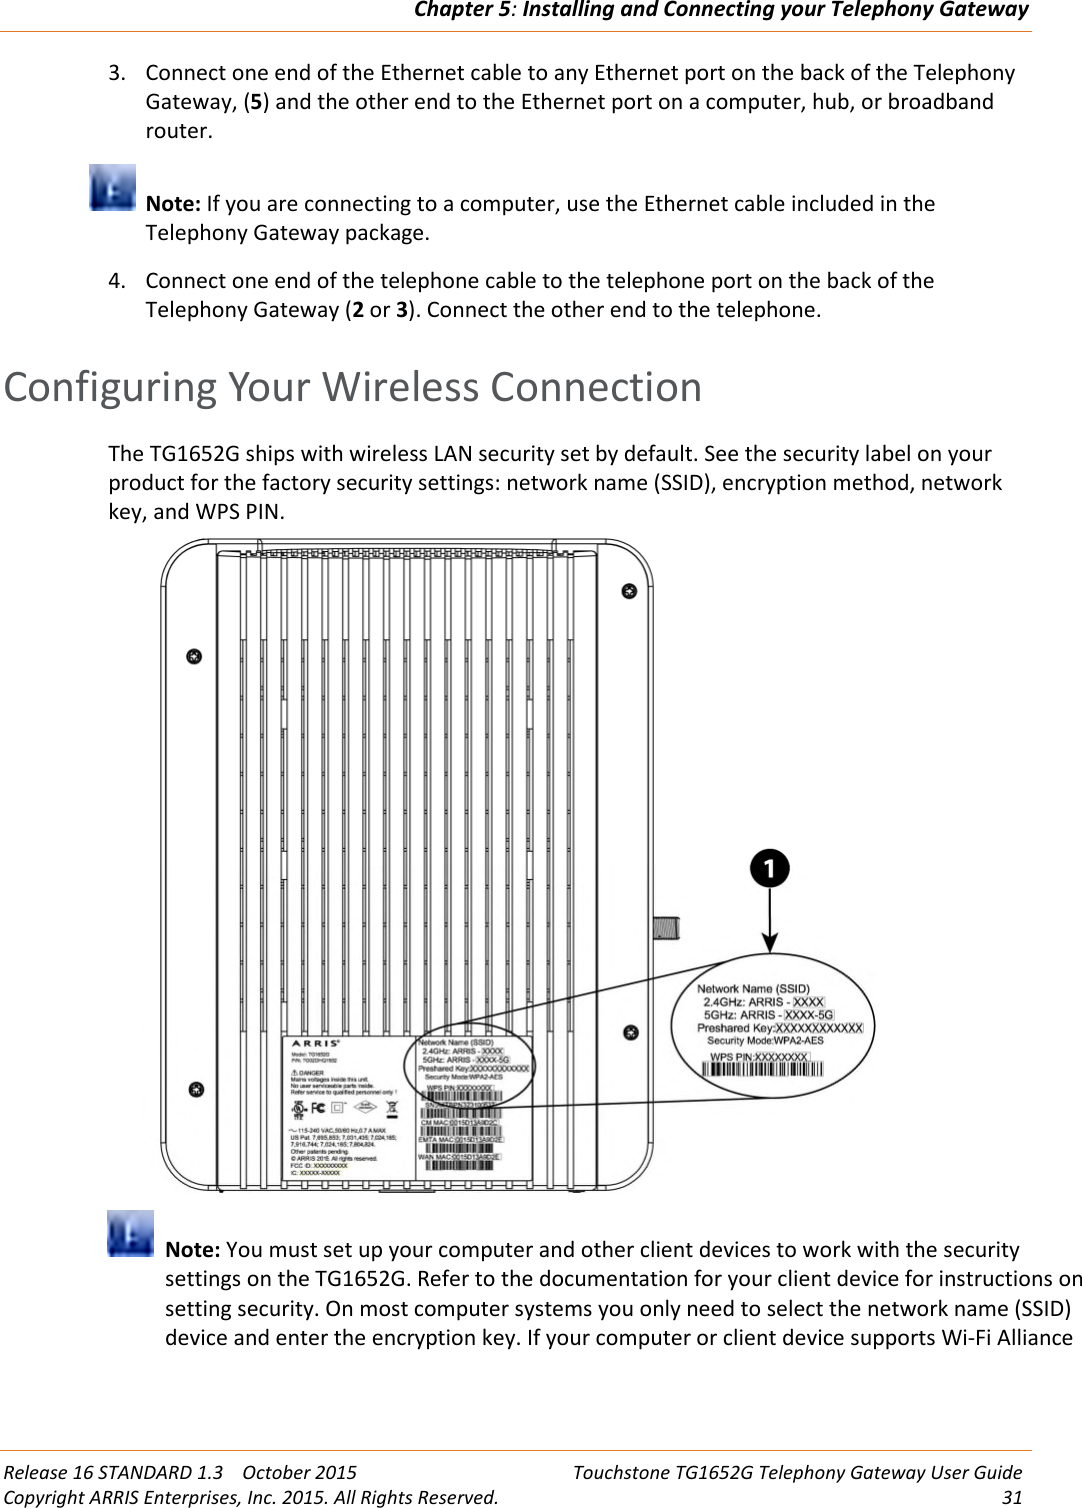 Chapter 5:Installing and Connecting your Telephony GatewayRelease 16 STANDARD 1.3 October 2015 Touchstone TG1652G Telephony Gateway User GuideCopyright ARRIS Enterprises, Inc. 2015. All Rights Reserved. 313. Connect one end of the Ethernet cable to any Ethernet port on the back of the TelephonyGateway, (5) and the other end to the Ethernet port on a computer, hub, or broadbandrouter.Note: If you are connecting to a computer, use the Ethernet cable included in theTelephony Gateway package.4. Connect one end of the telephone cable to the telephone port on the back of theTelephony Gateway (2or 3). Connect the other end to the telephone.Configuring Your Wireless ConnectionThe TG1652G ships with wireless LAN security set by default. See the security label on yourproduct for the factory security settings: network name (SSID), encryption method, networkkey, and WPS PIN.Note: You must set up your computer and other client devices to work with the securitysettings on the TG1652G. Refer to the documentation for your client device for instructions onsetting security. On most computer systems you only need to select the network name (SSID)device and enter the encryption key. If your computer or client device supports Wi-Fi Alliance